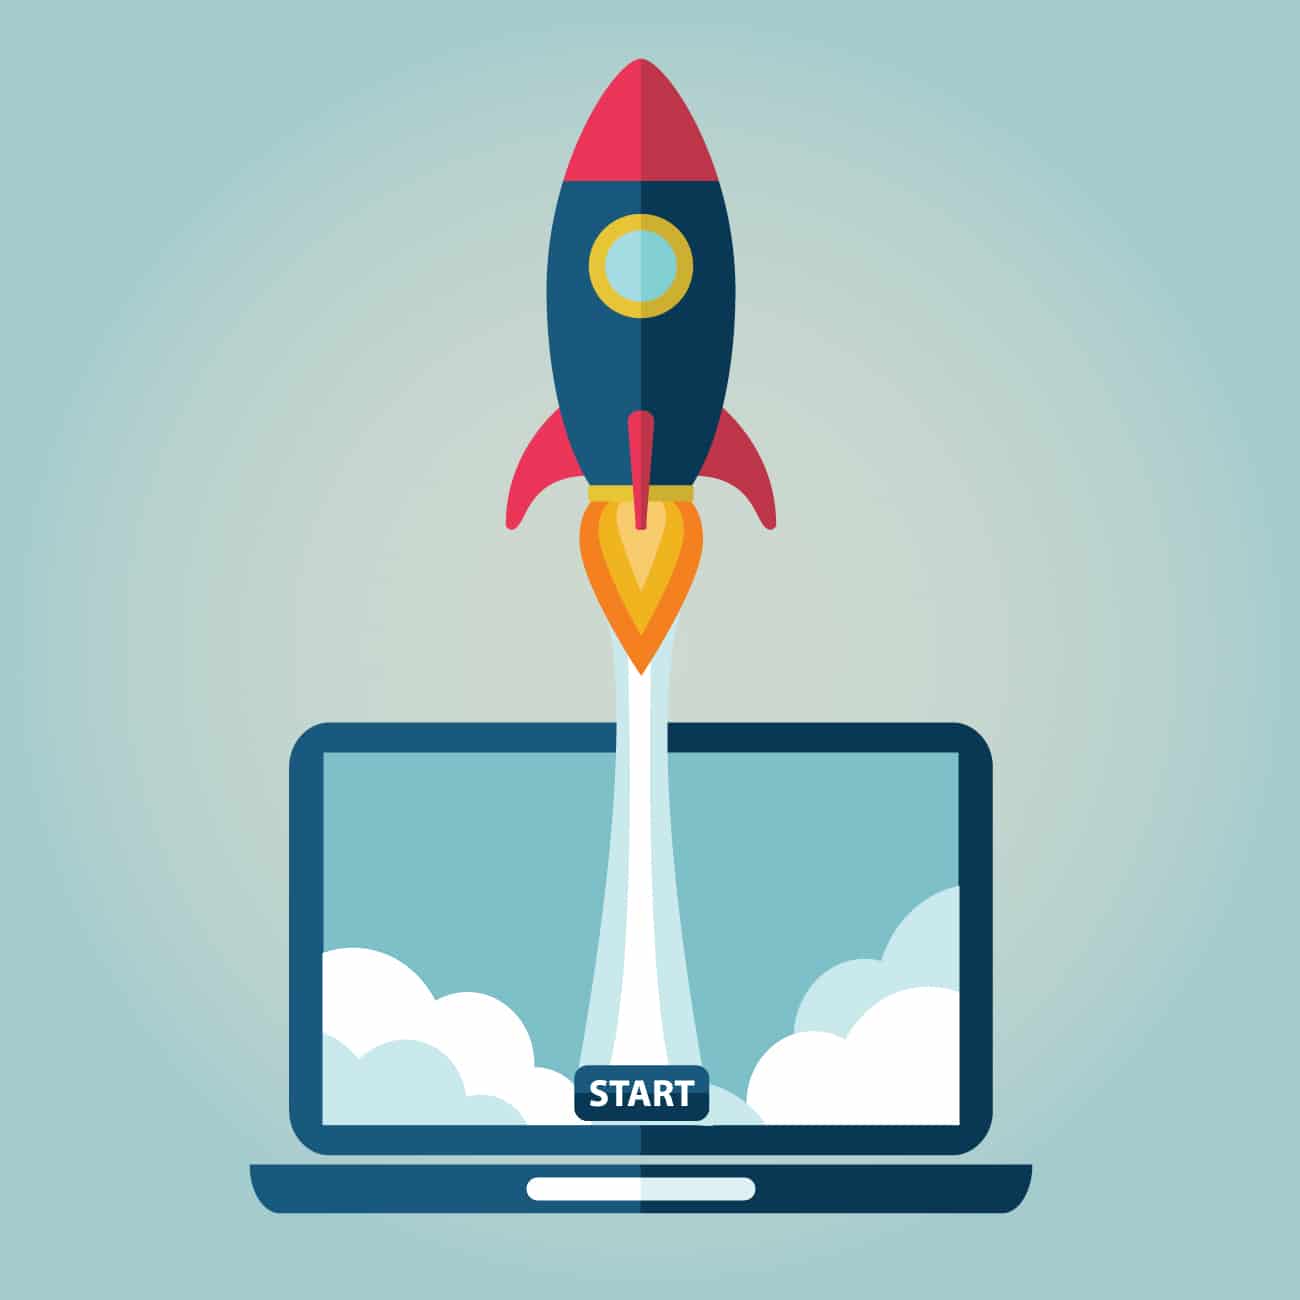 What to Expect After Your Website Launch